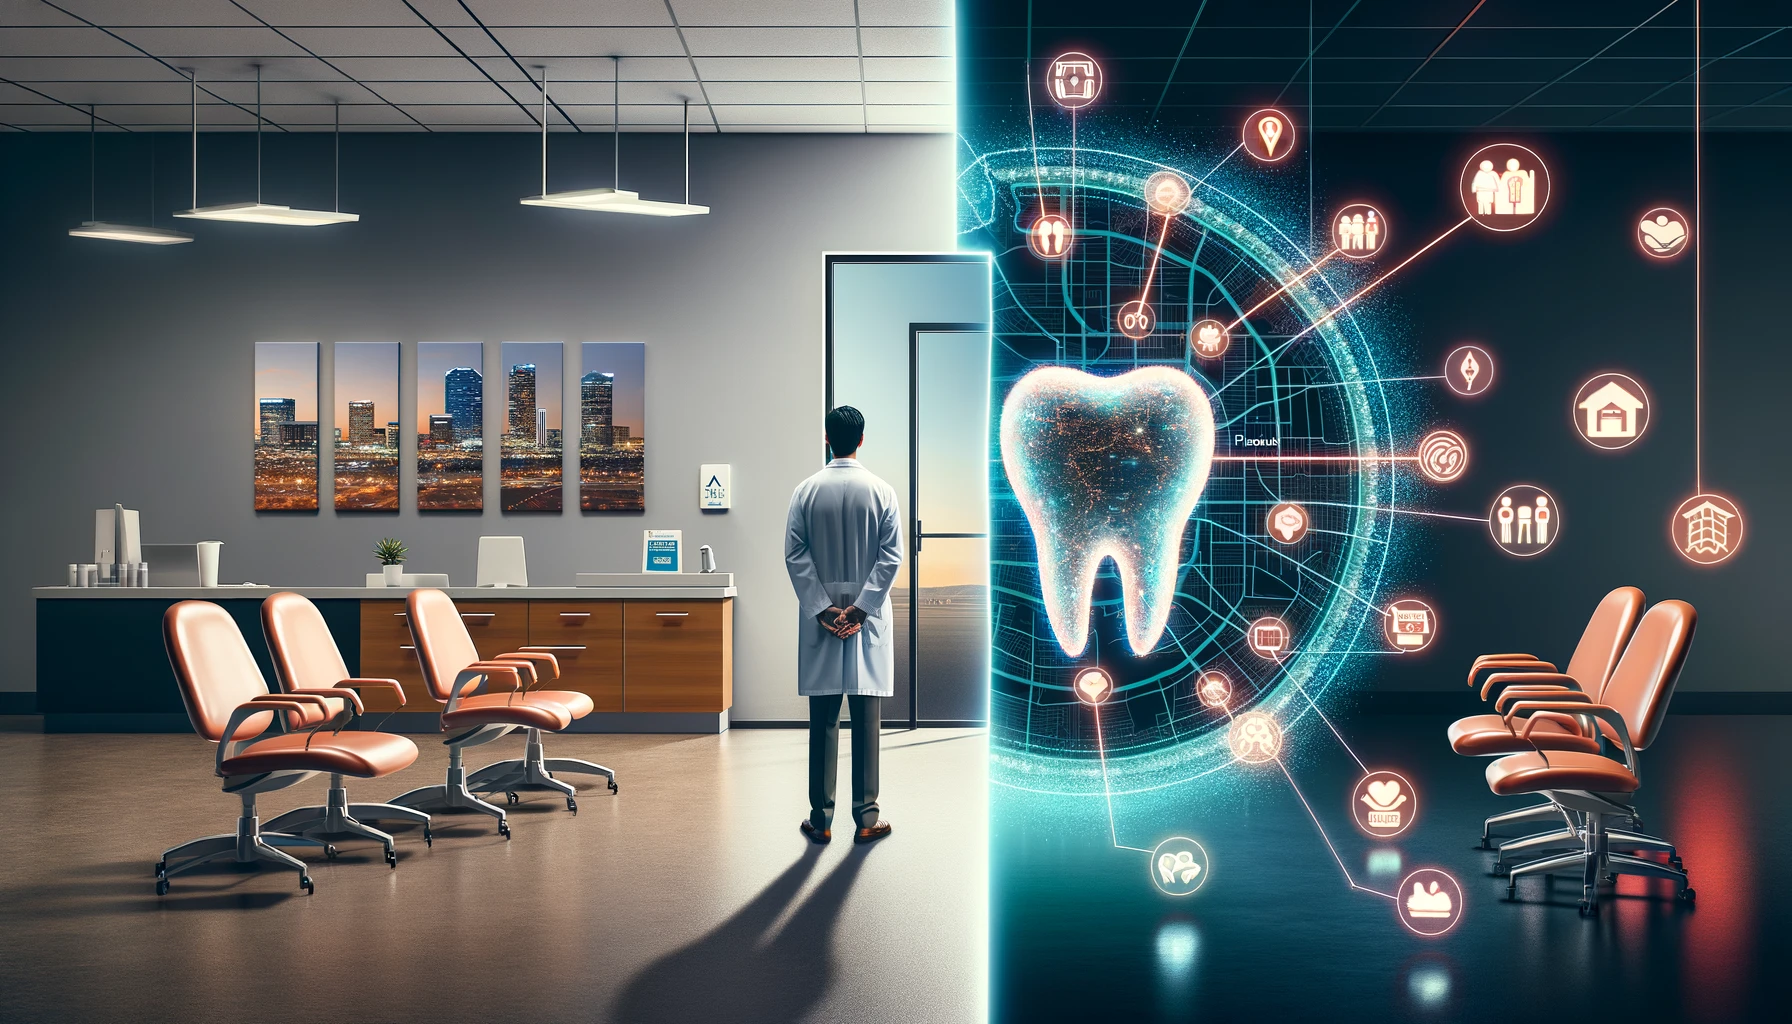 A split image showing traditional vs. targeted advertising for dentists: an empty waiting room on the left and a digital map of Phoenix with glowing connections to diverse locations on the right.